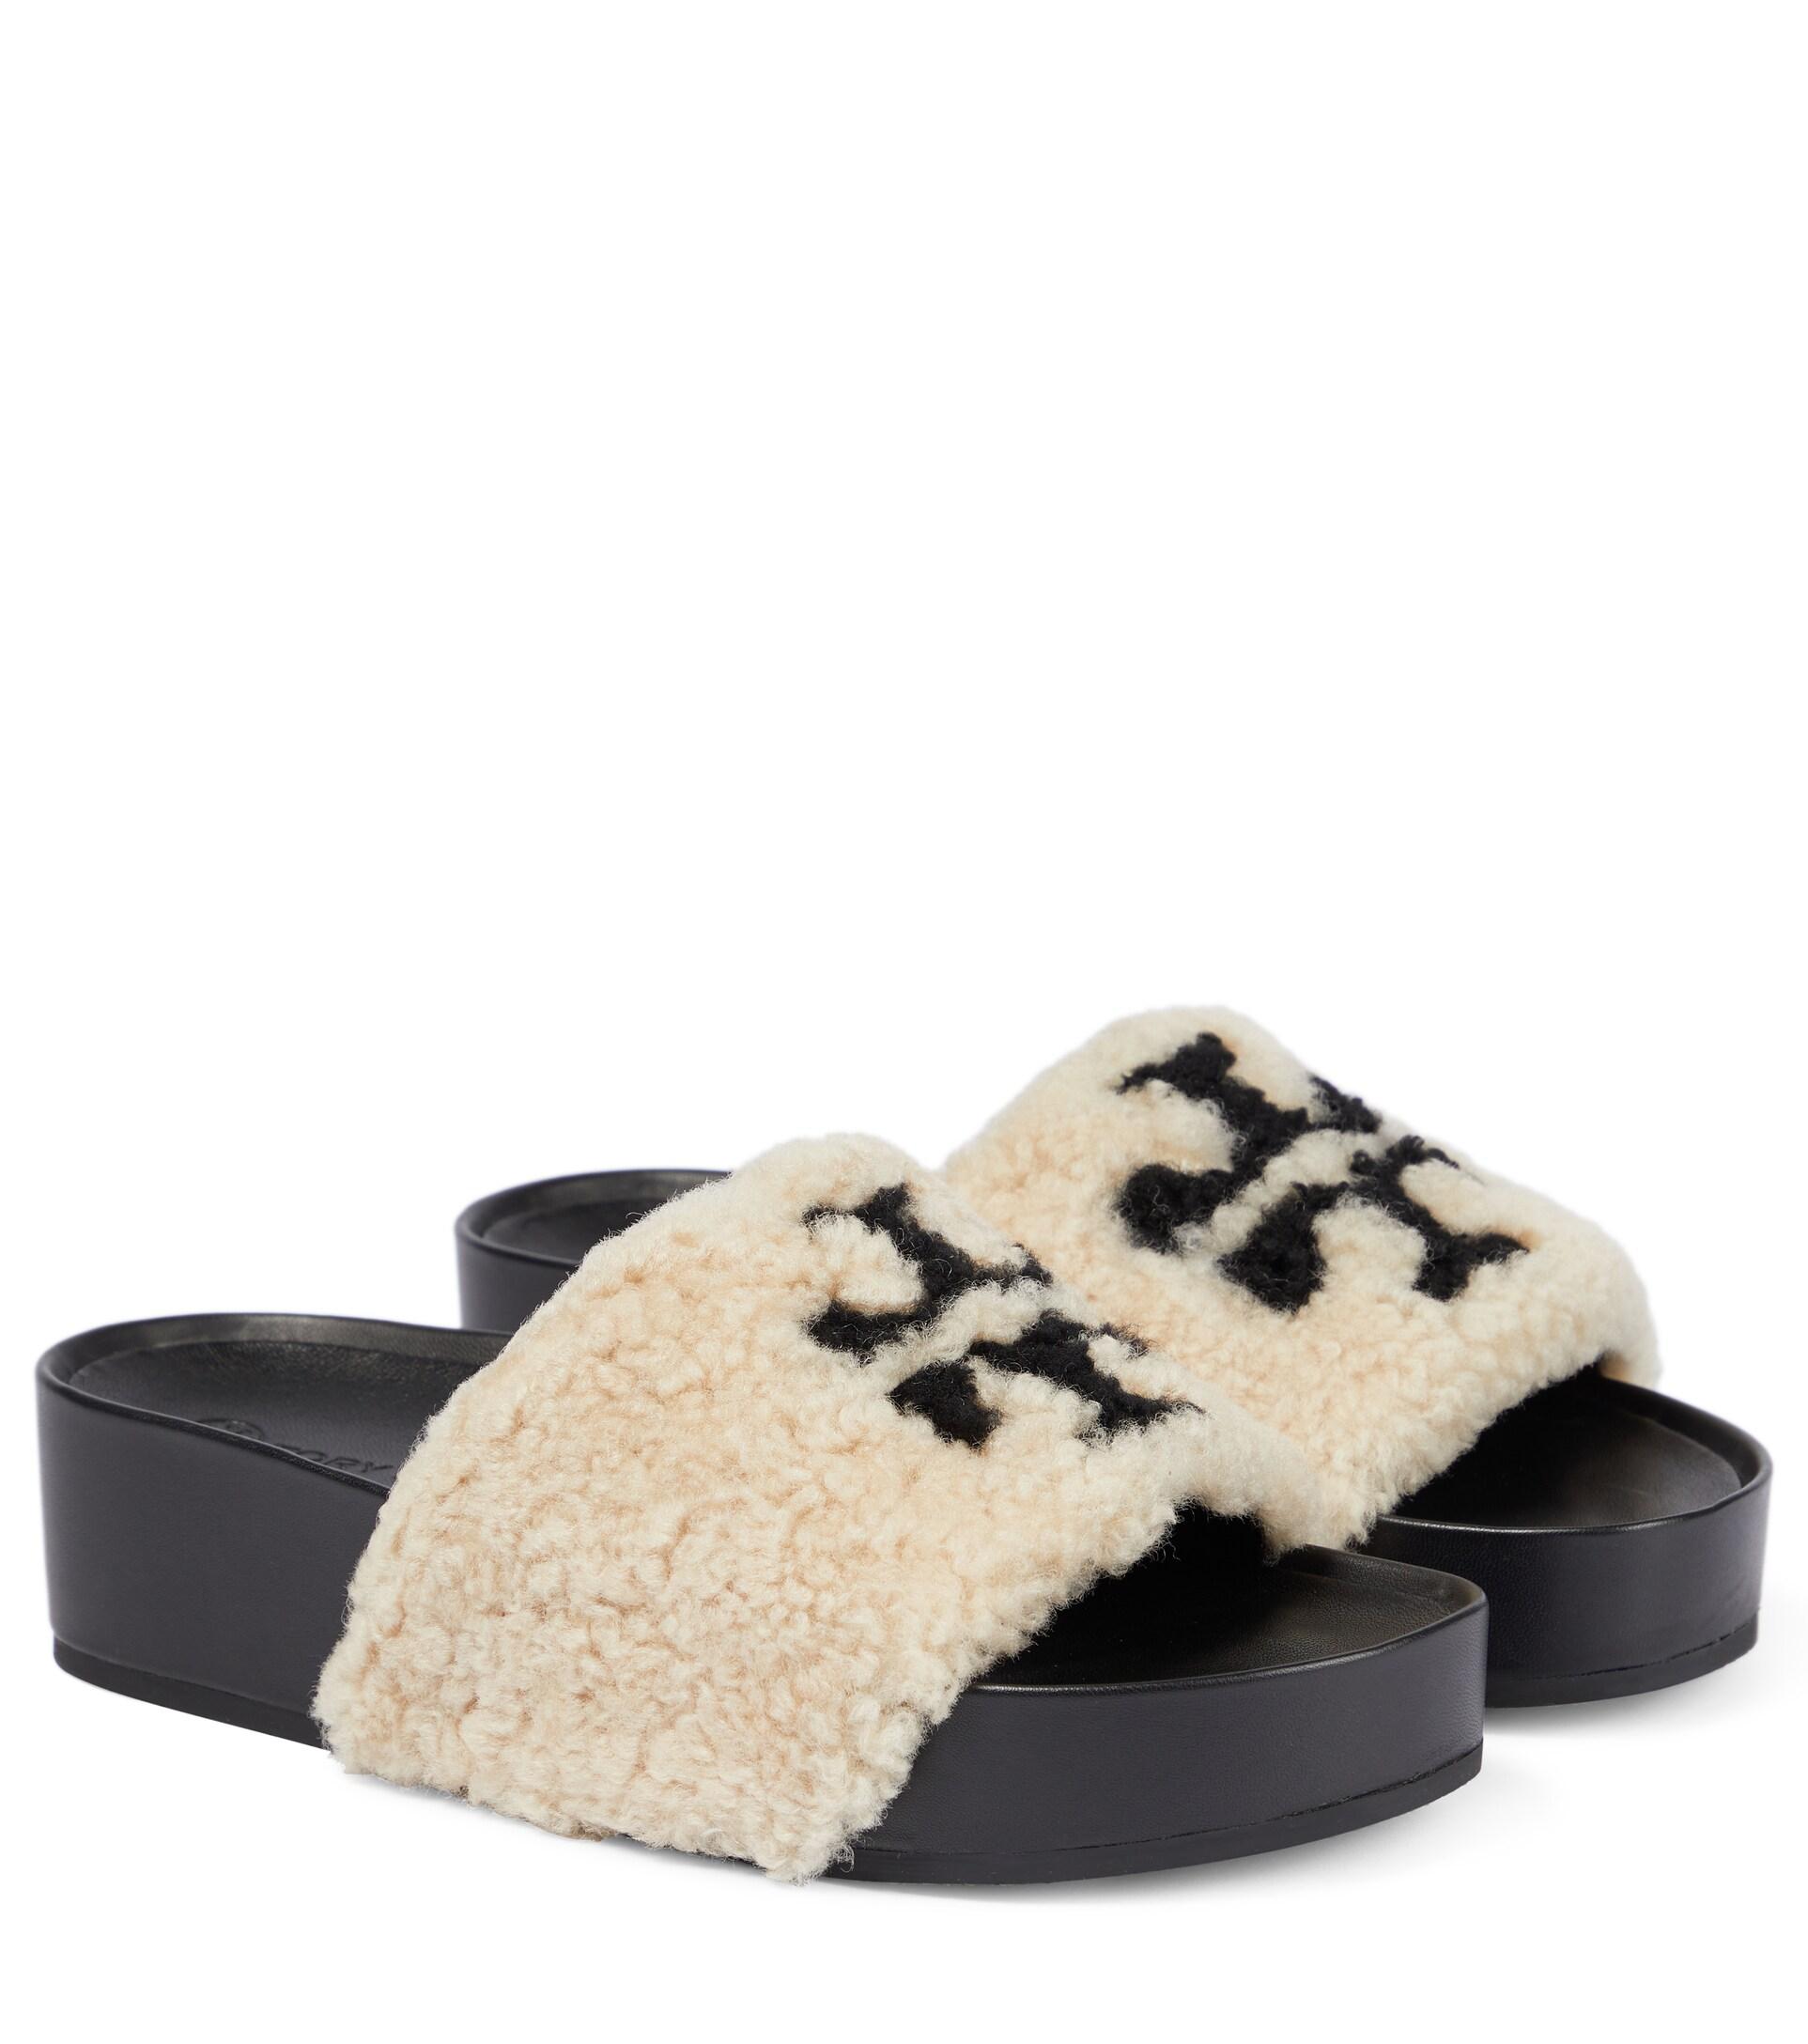 Tory Burch Double T Shearling Platform Slides in Black | Lyst